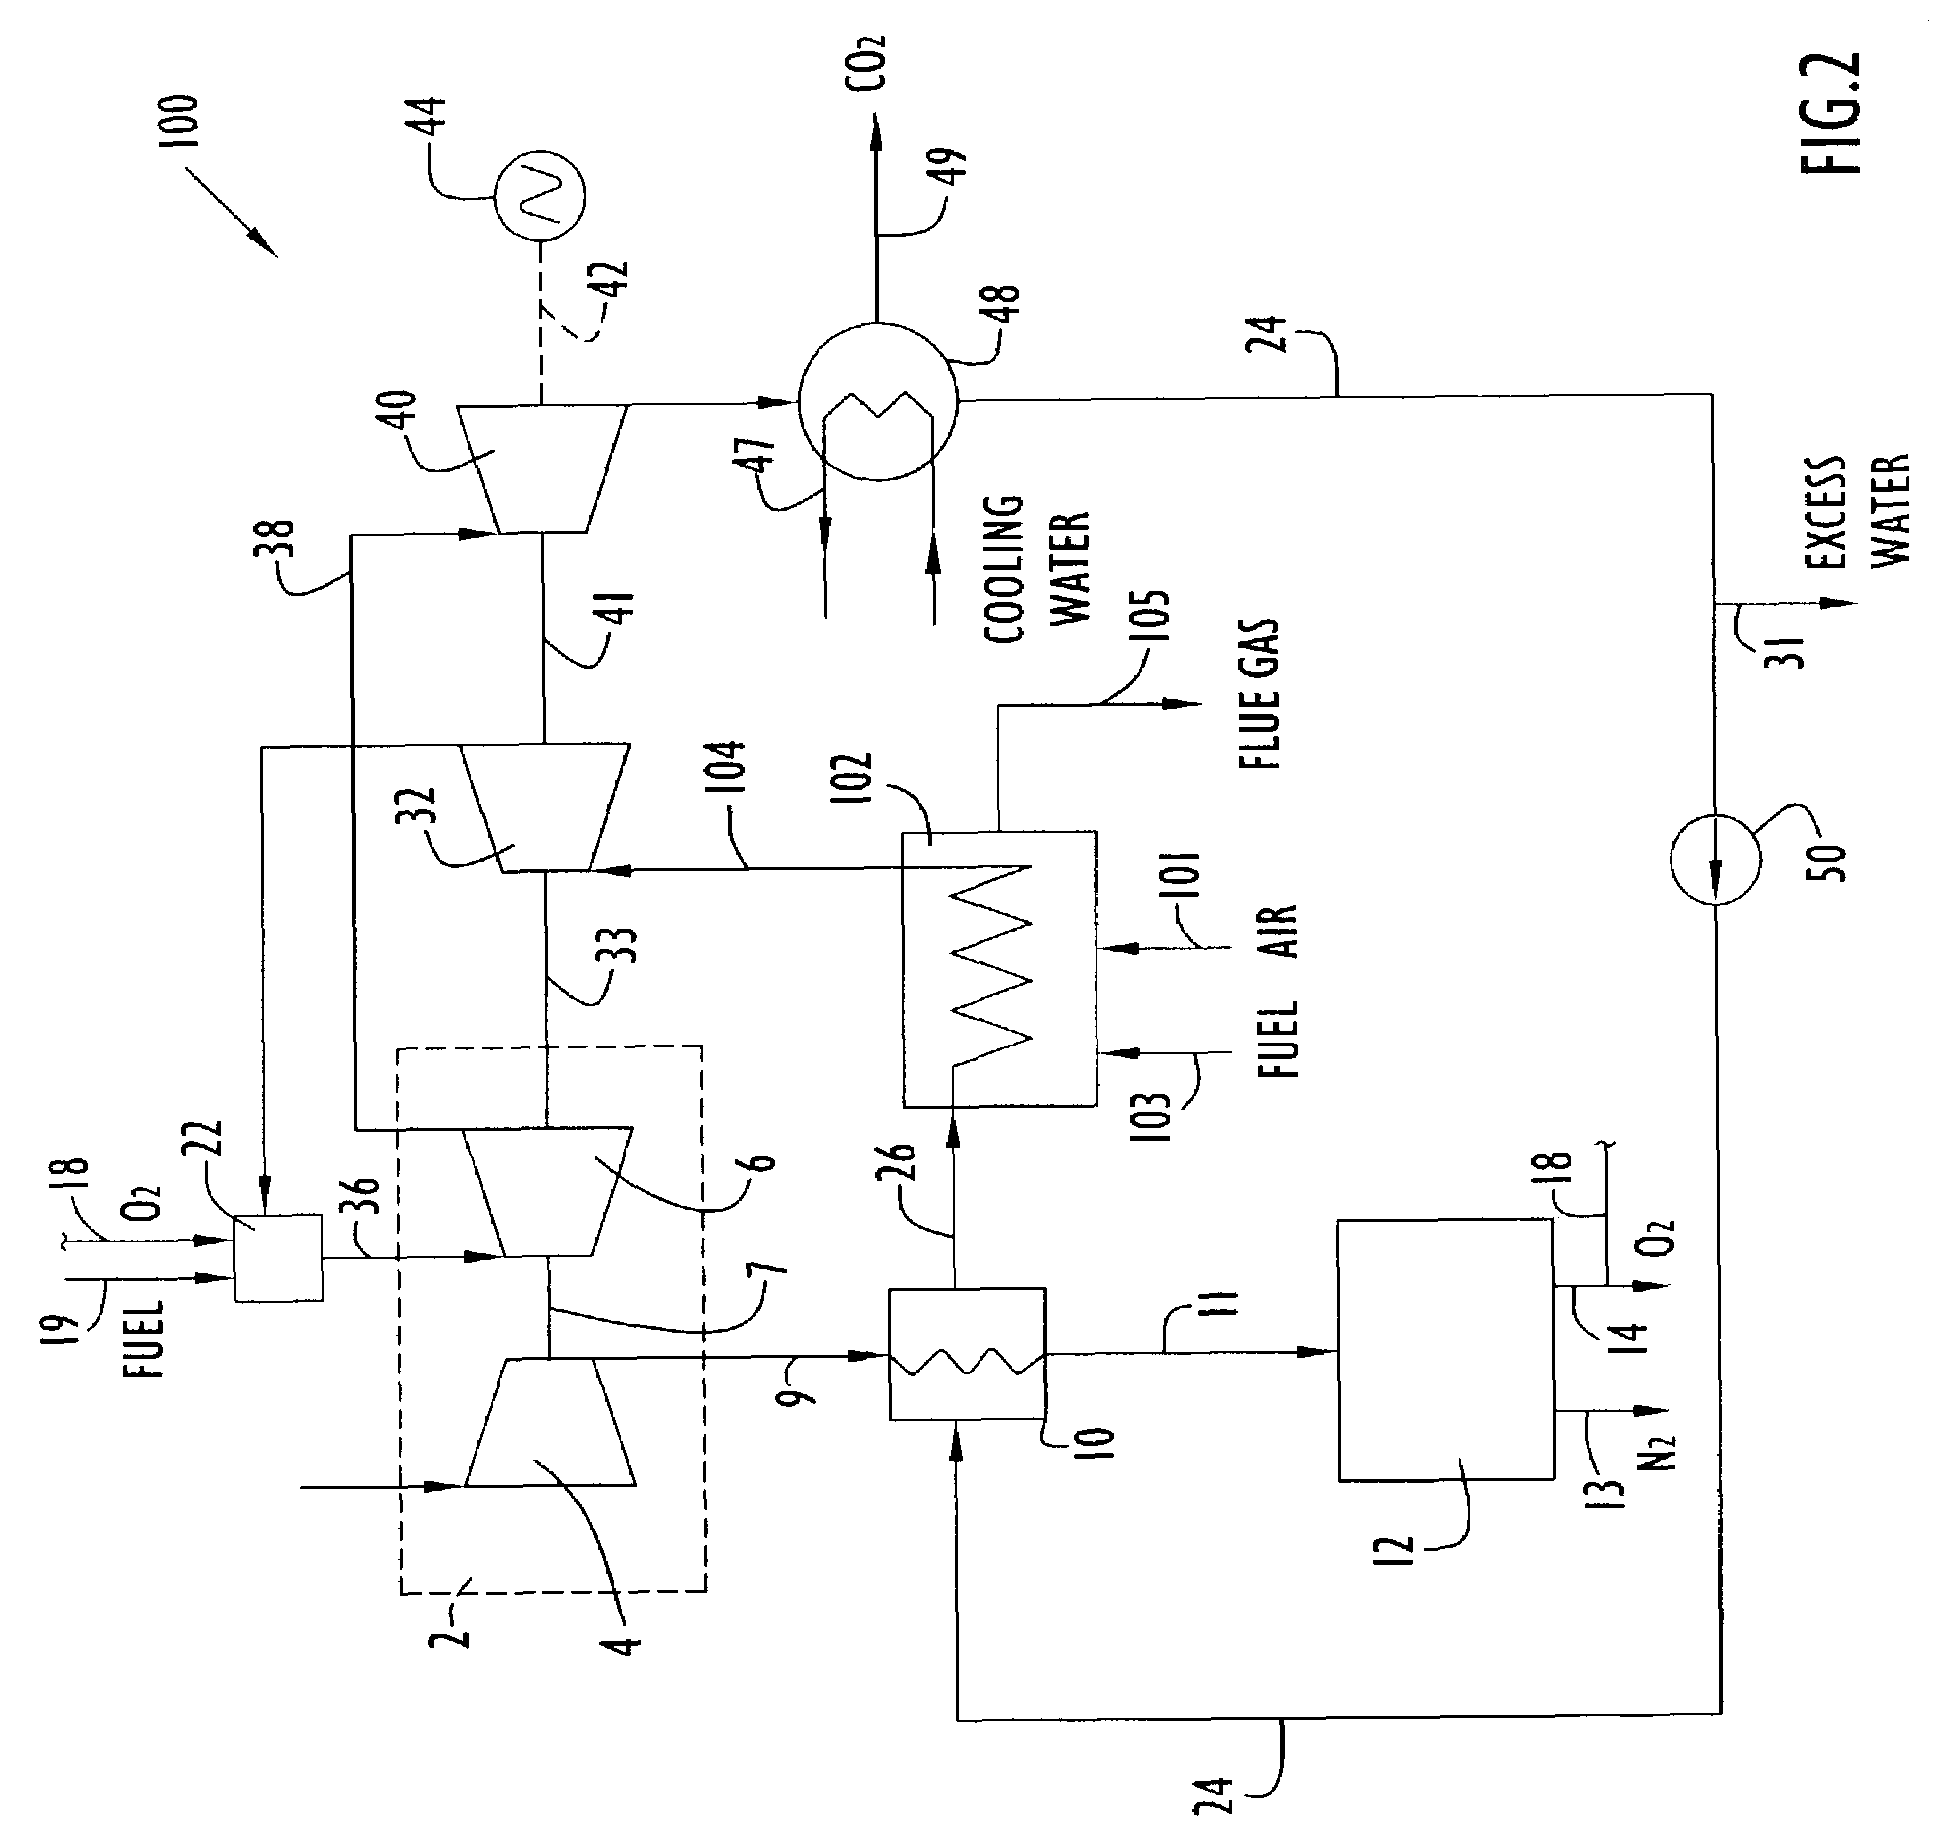 Integrated air separation and oxygen fired power generation system